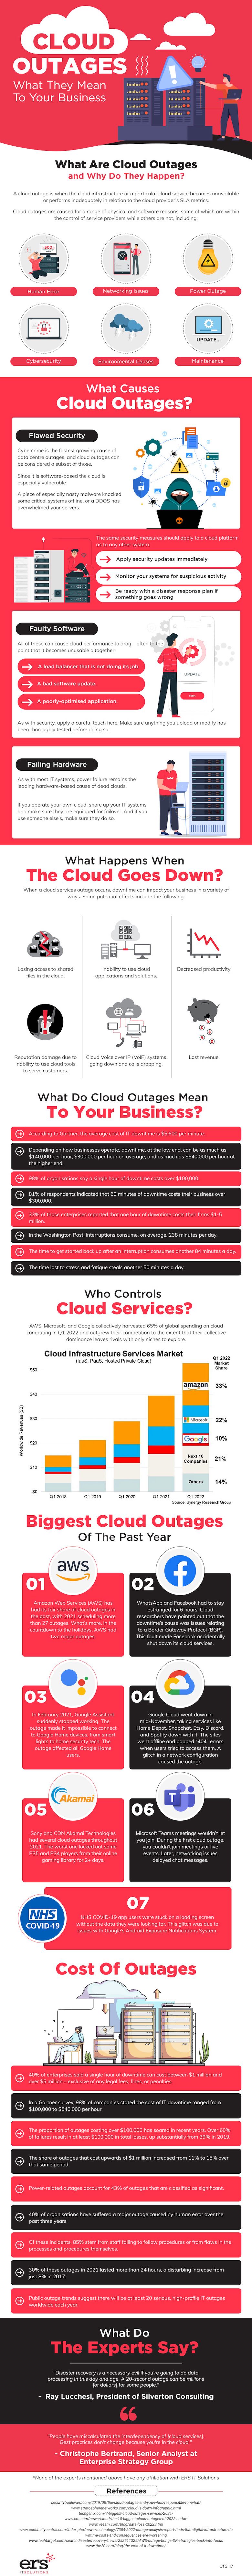 What Cloud outages mean for your business infographic